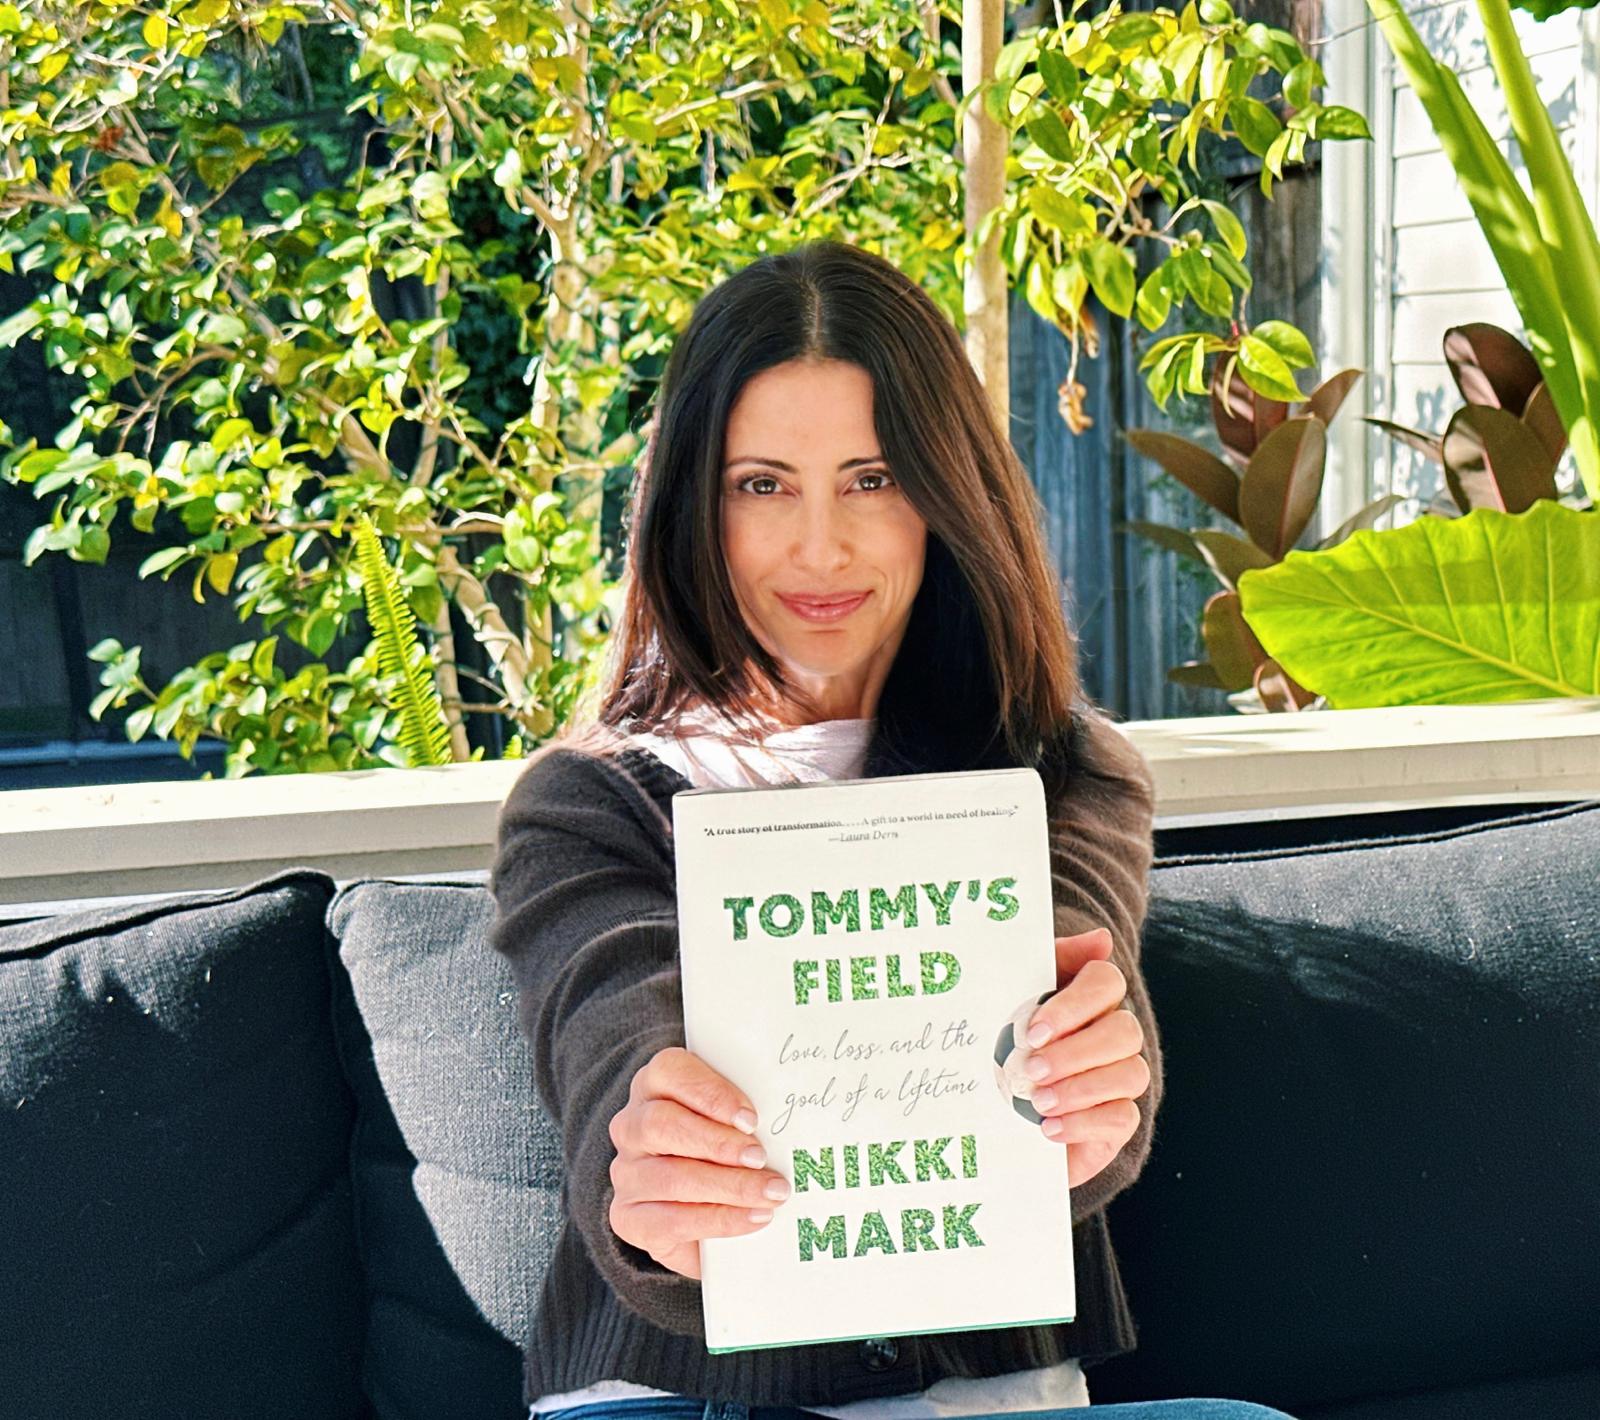 Woman holding a book titled "Tommy's Field" outdoors.